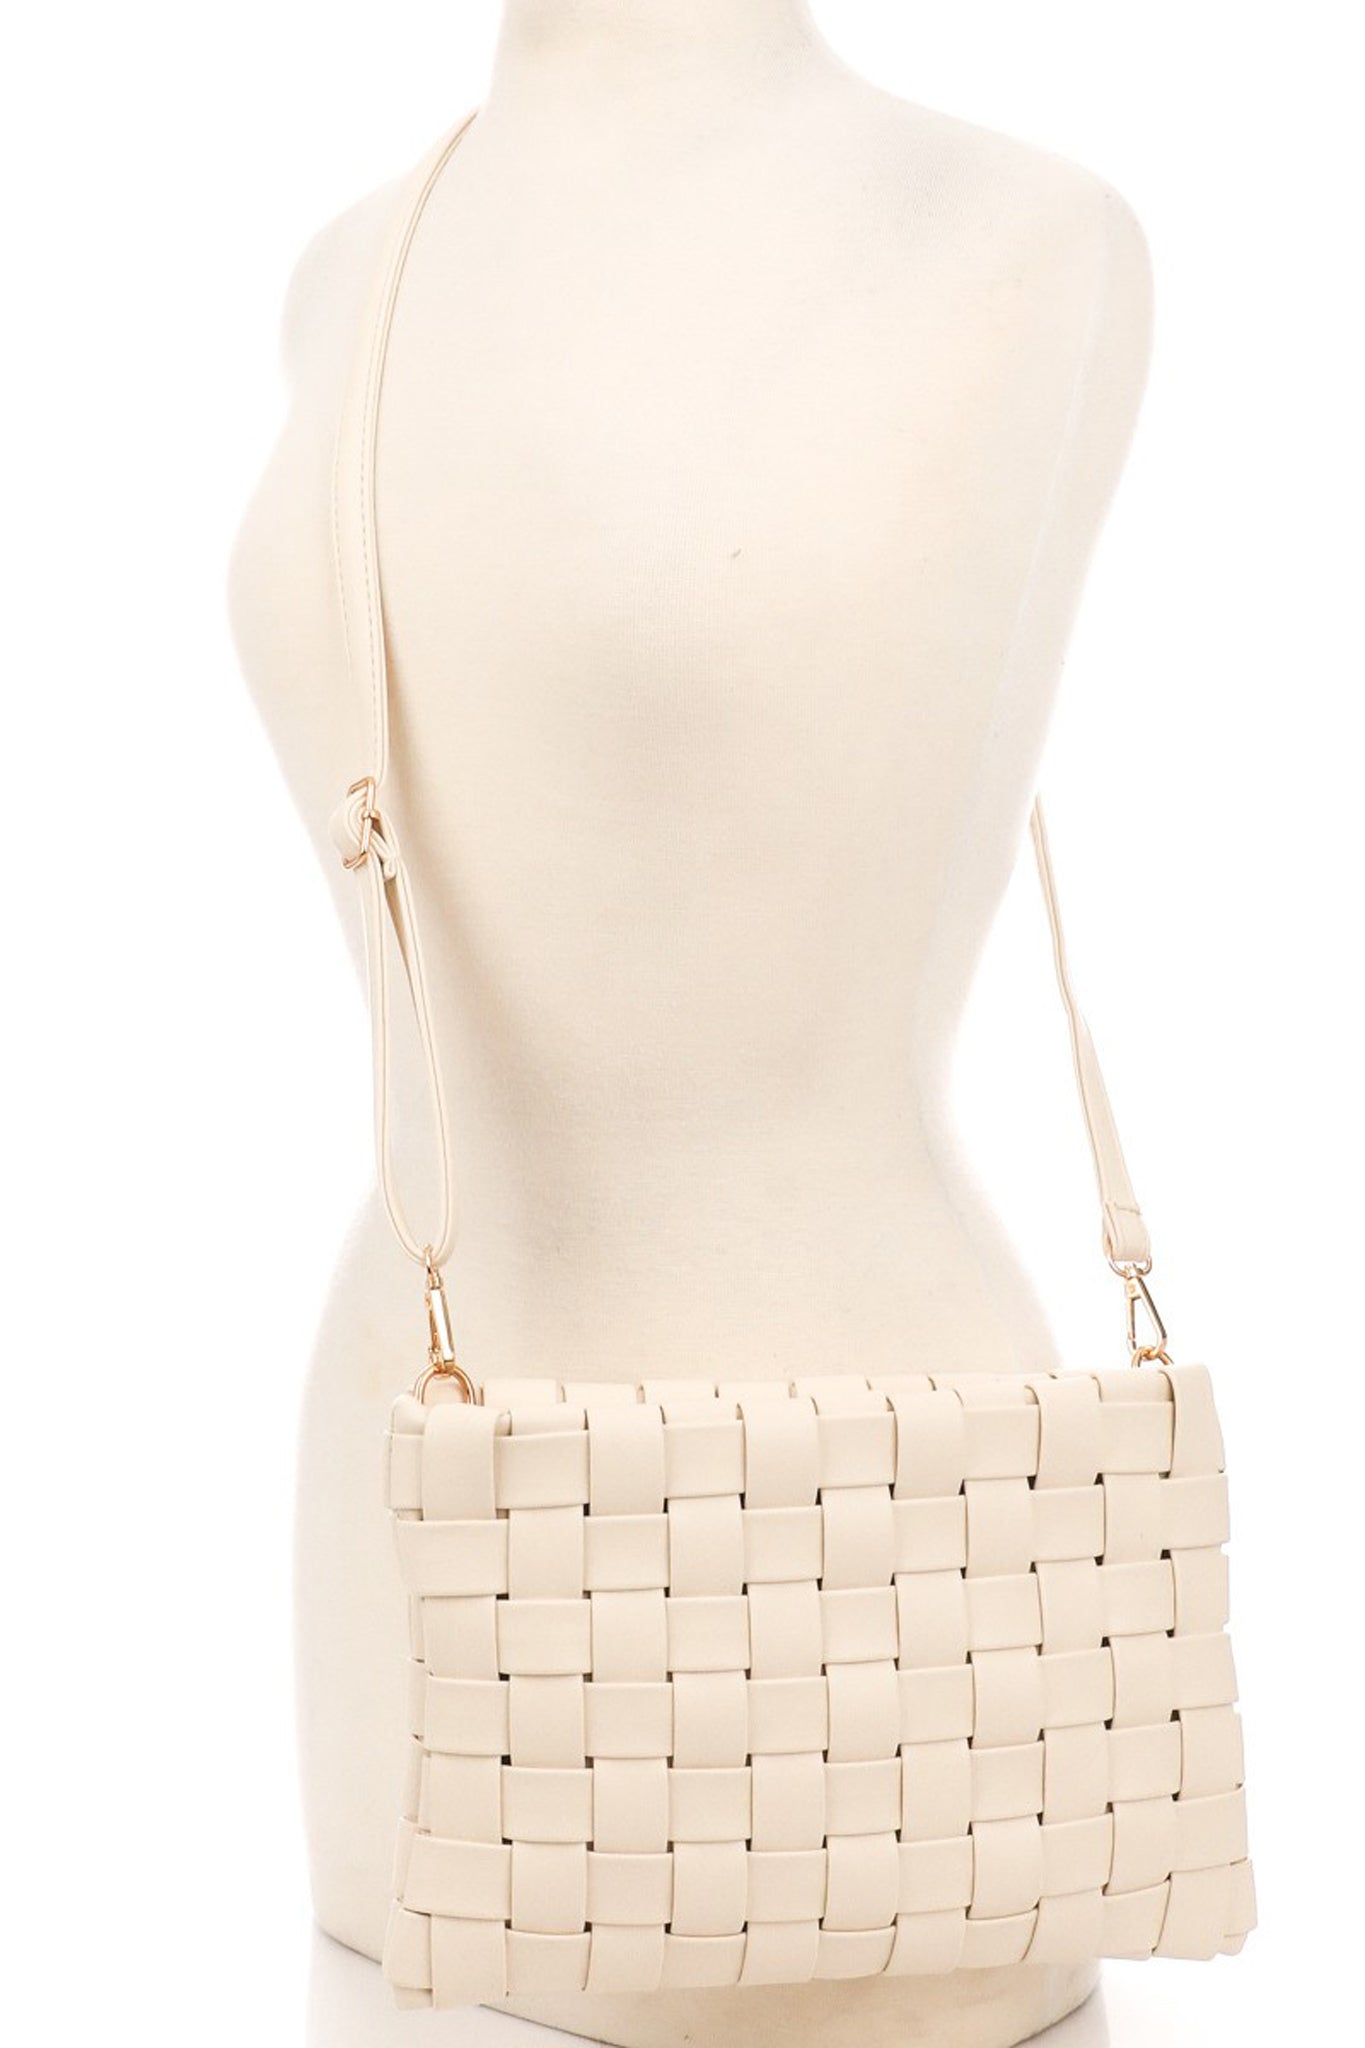 View 5 of Keen Woven Clutch in Ivory, a Bags from Larrea Cove. Detail: .